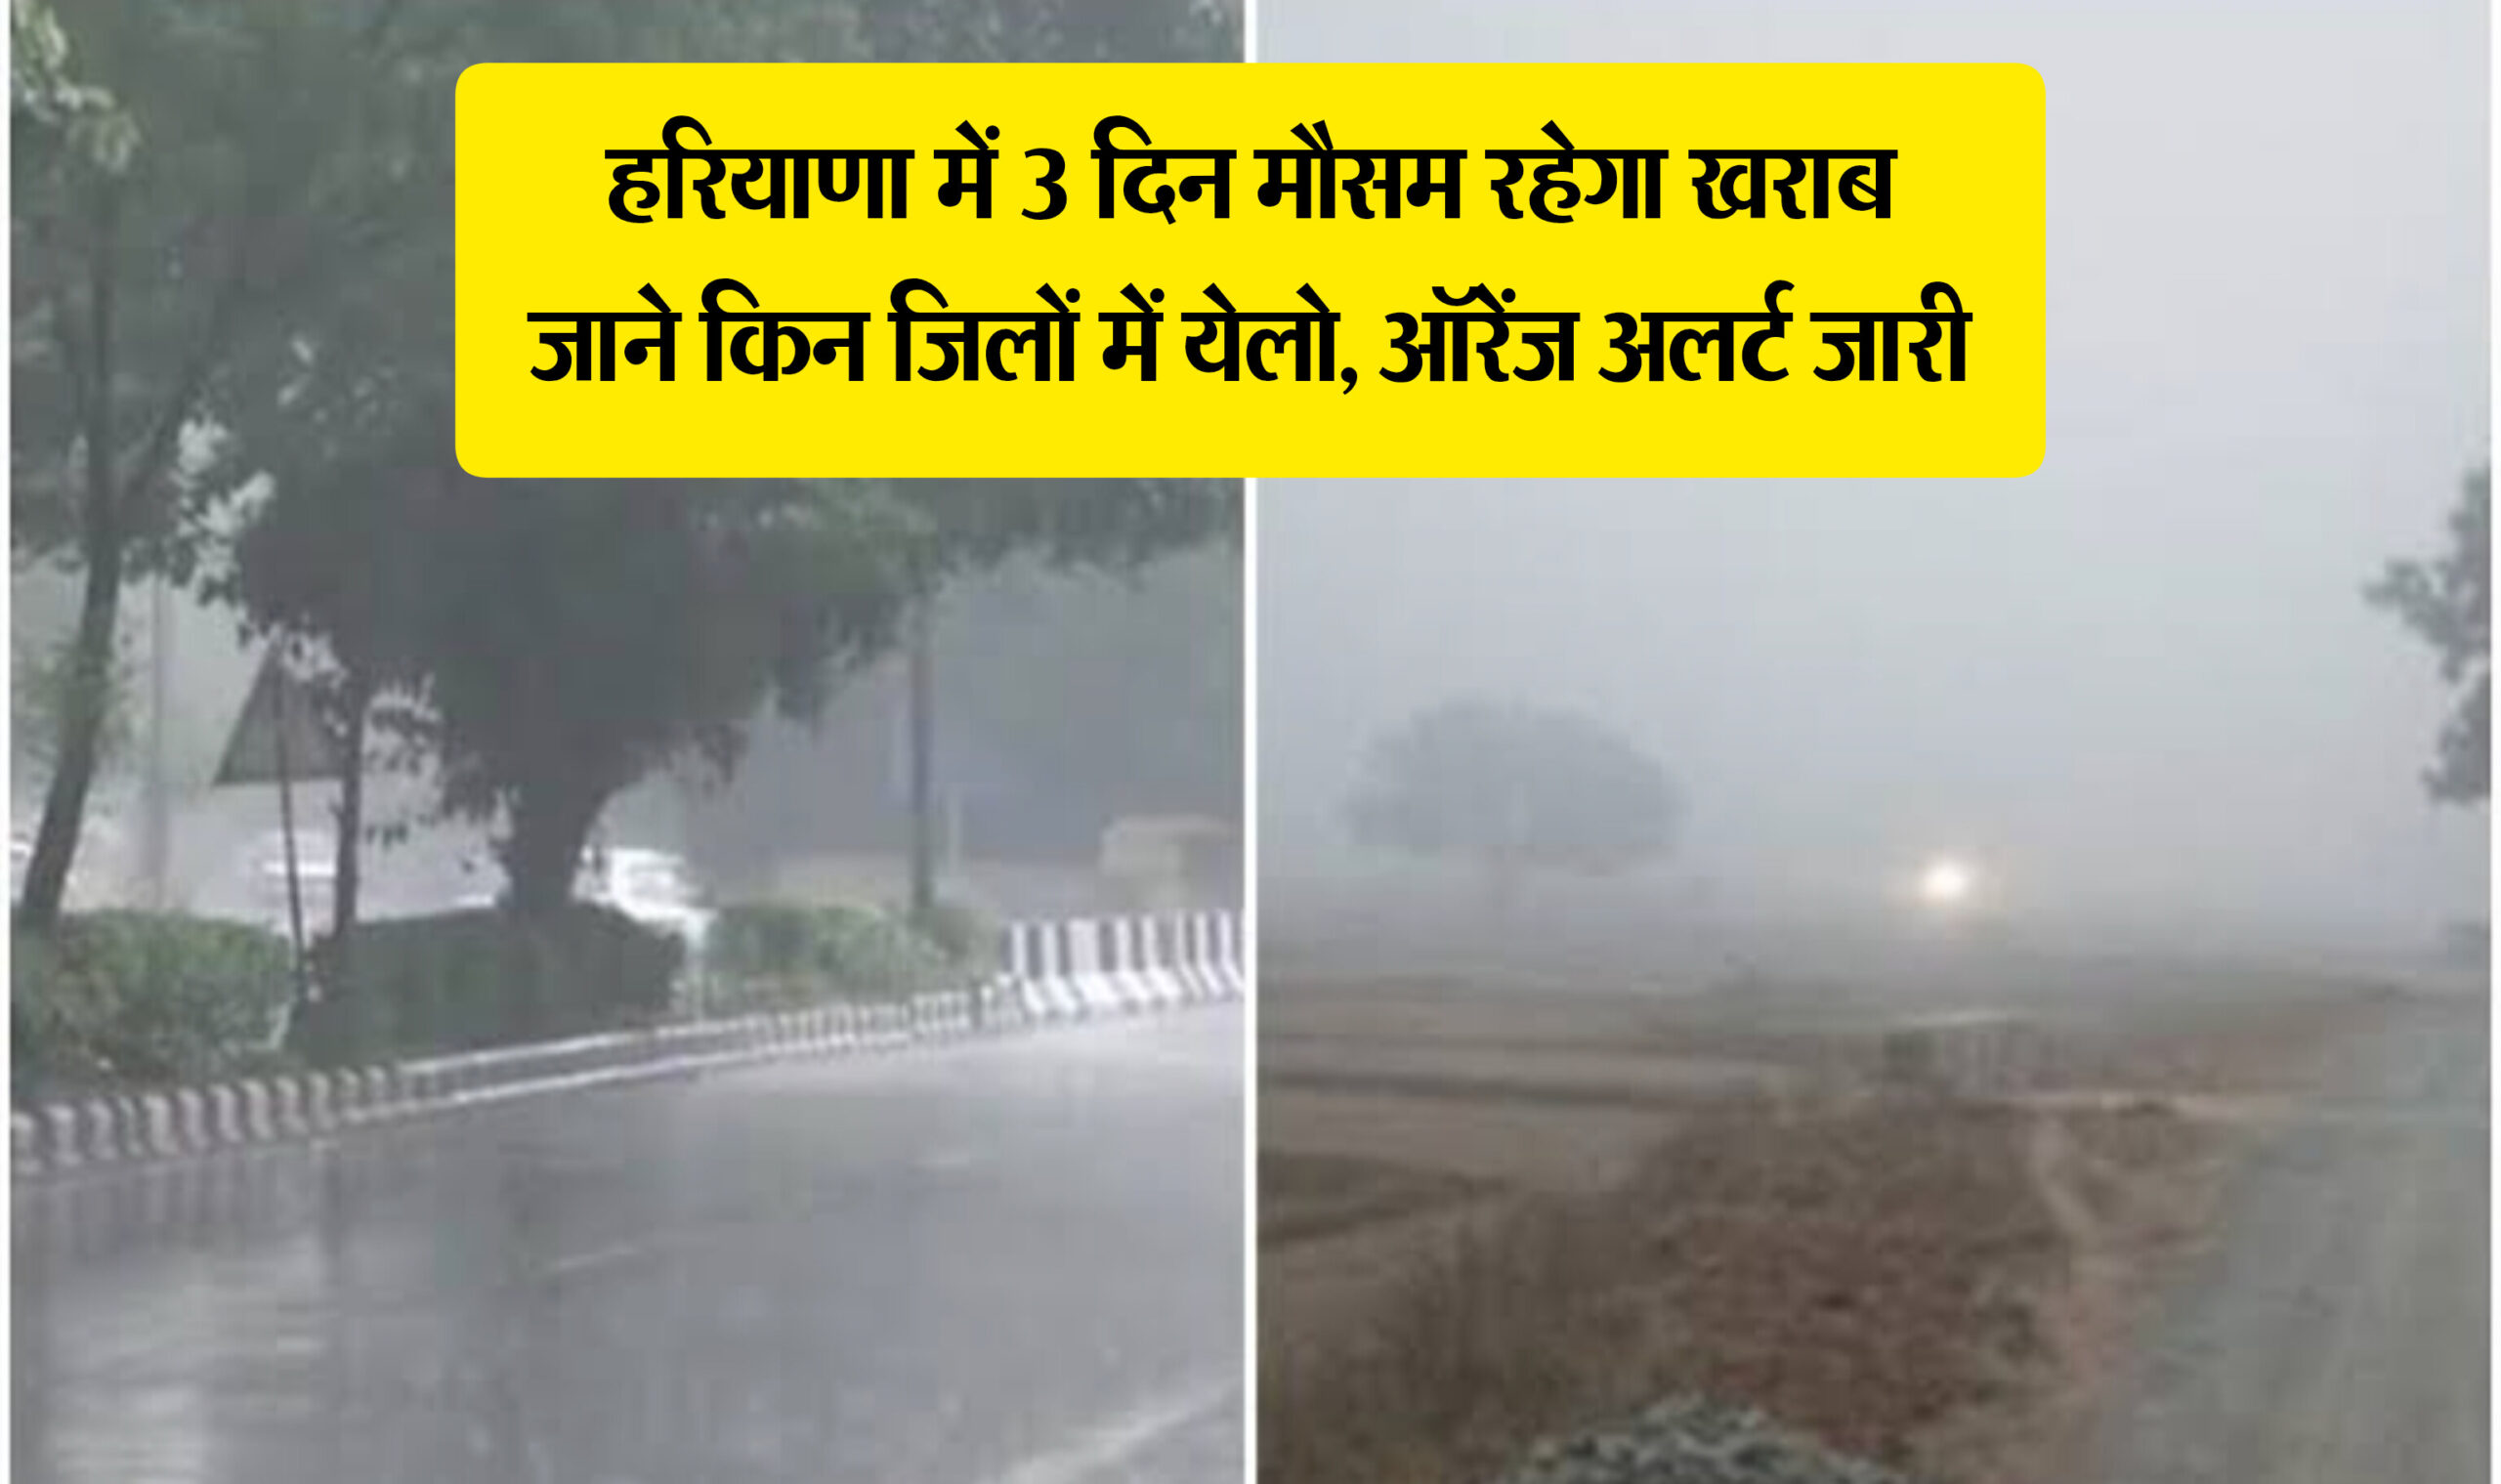 Haryana weather update; Weather will take a turn in Haryana from today, possibility of light rain in 4 districts, Yellow, Orange alert issued, see weather update